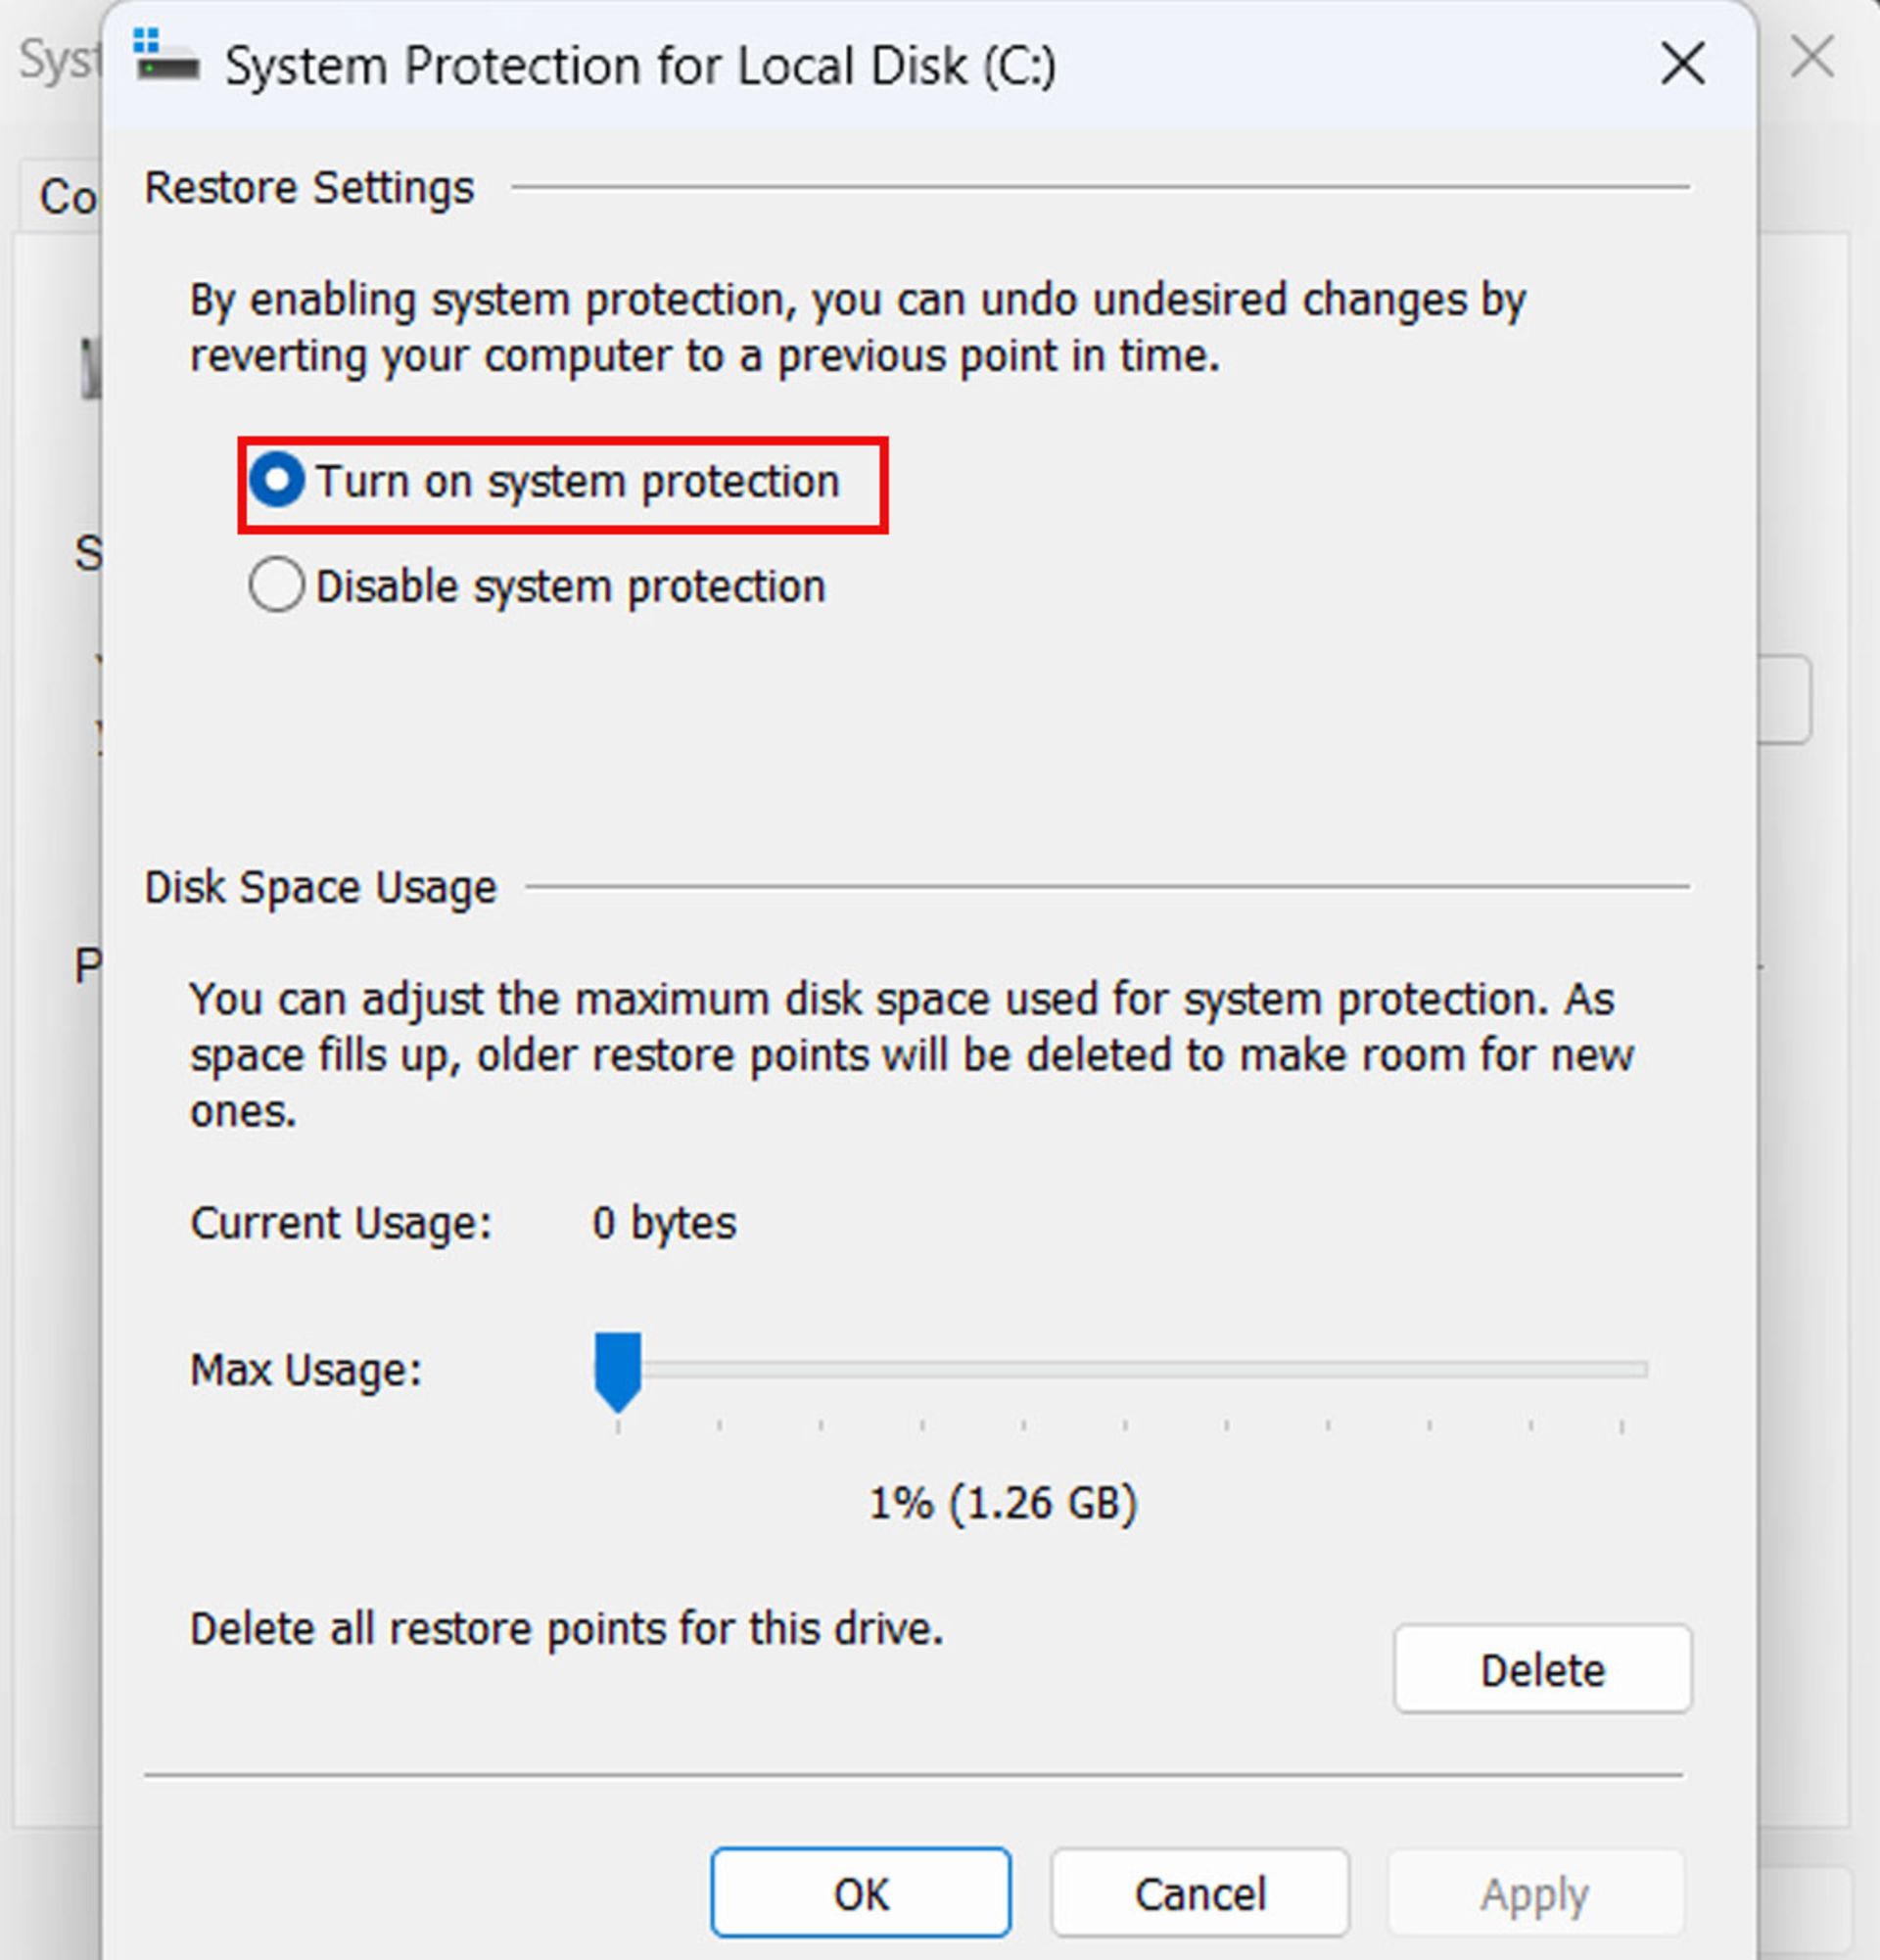 System Properties for Local Disk settings